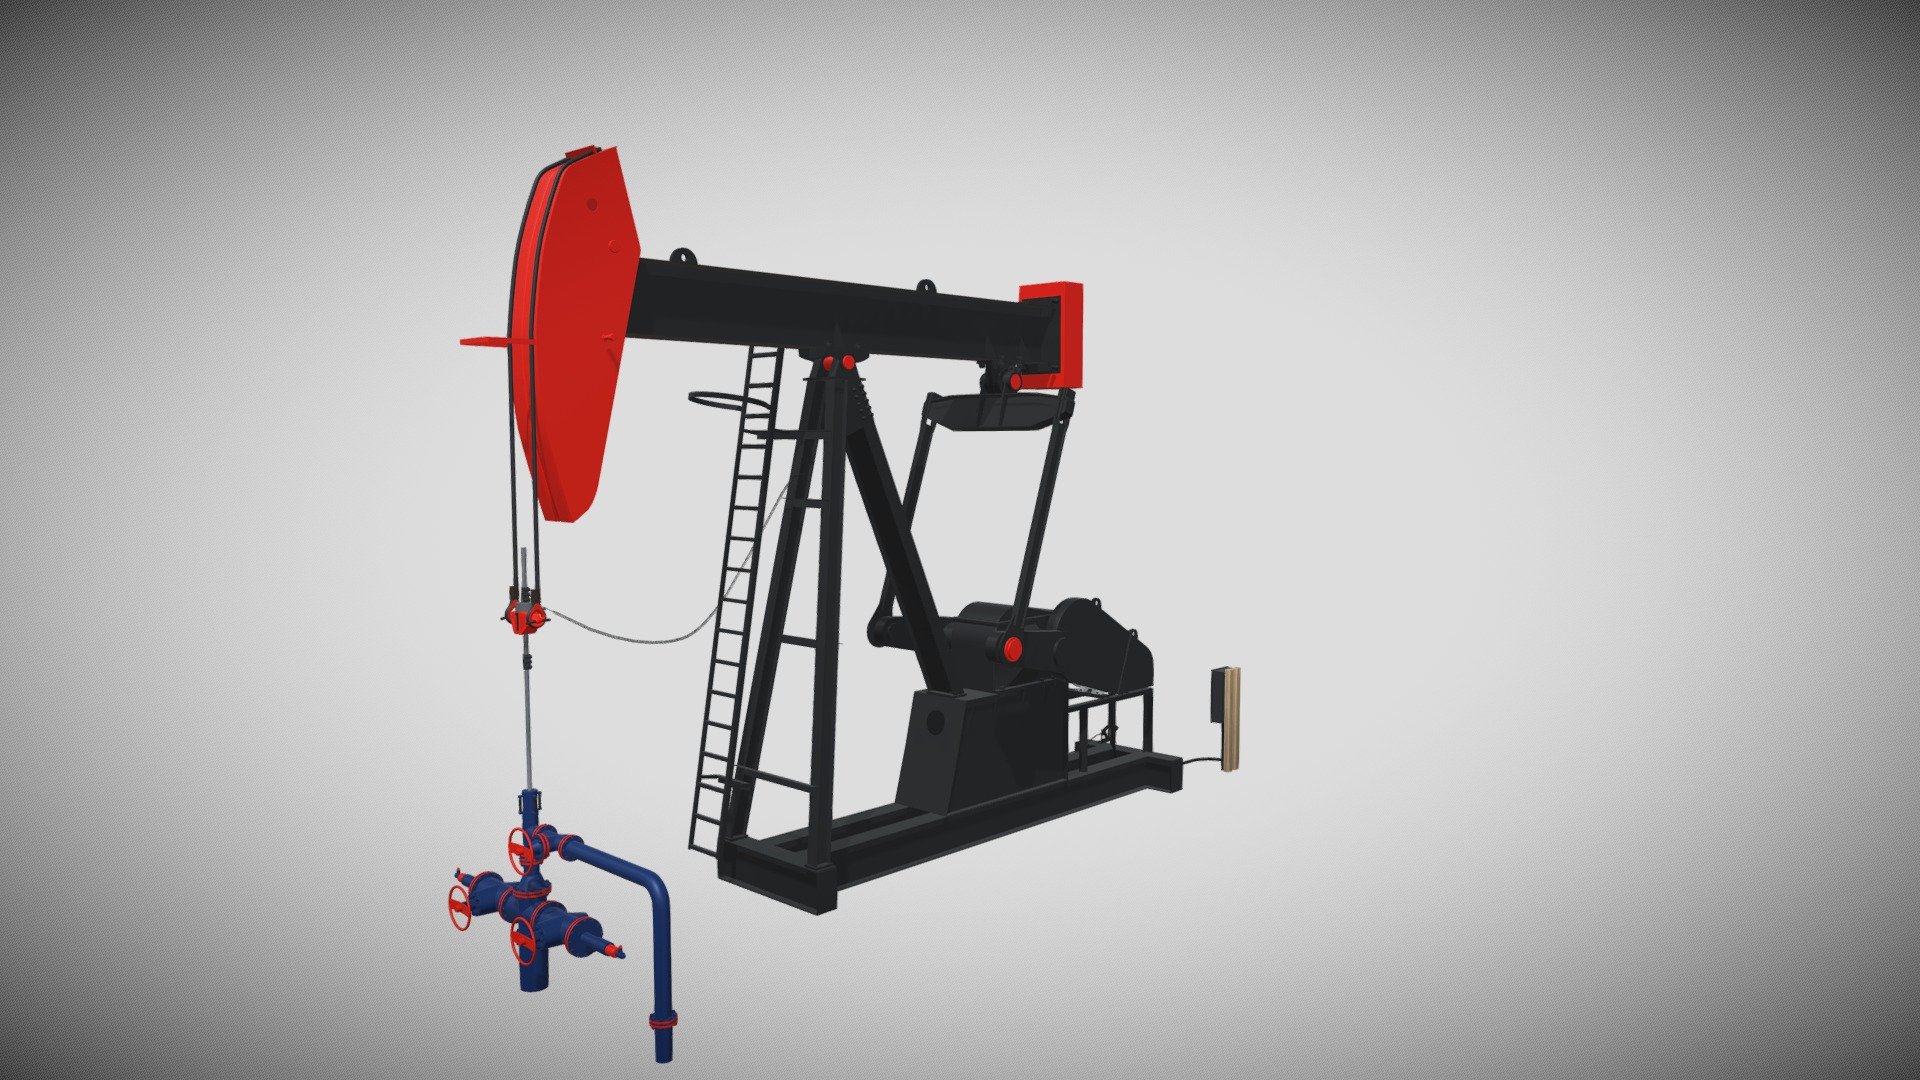 Detailed model of a Beam Balanced Pumpjack, modeled in Cinema 4D.The model was created using approximate real world dimensions.

The model has 354,191 polys and 347,539 vertices.

An additional file has been provided containing the original Cinema 4D project file, textures and other 3d export files such as 3ds, fbx, obj and stl 3d model